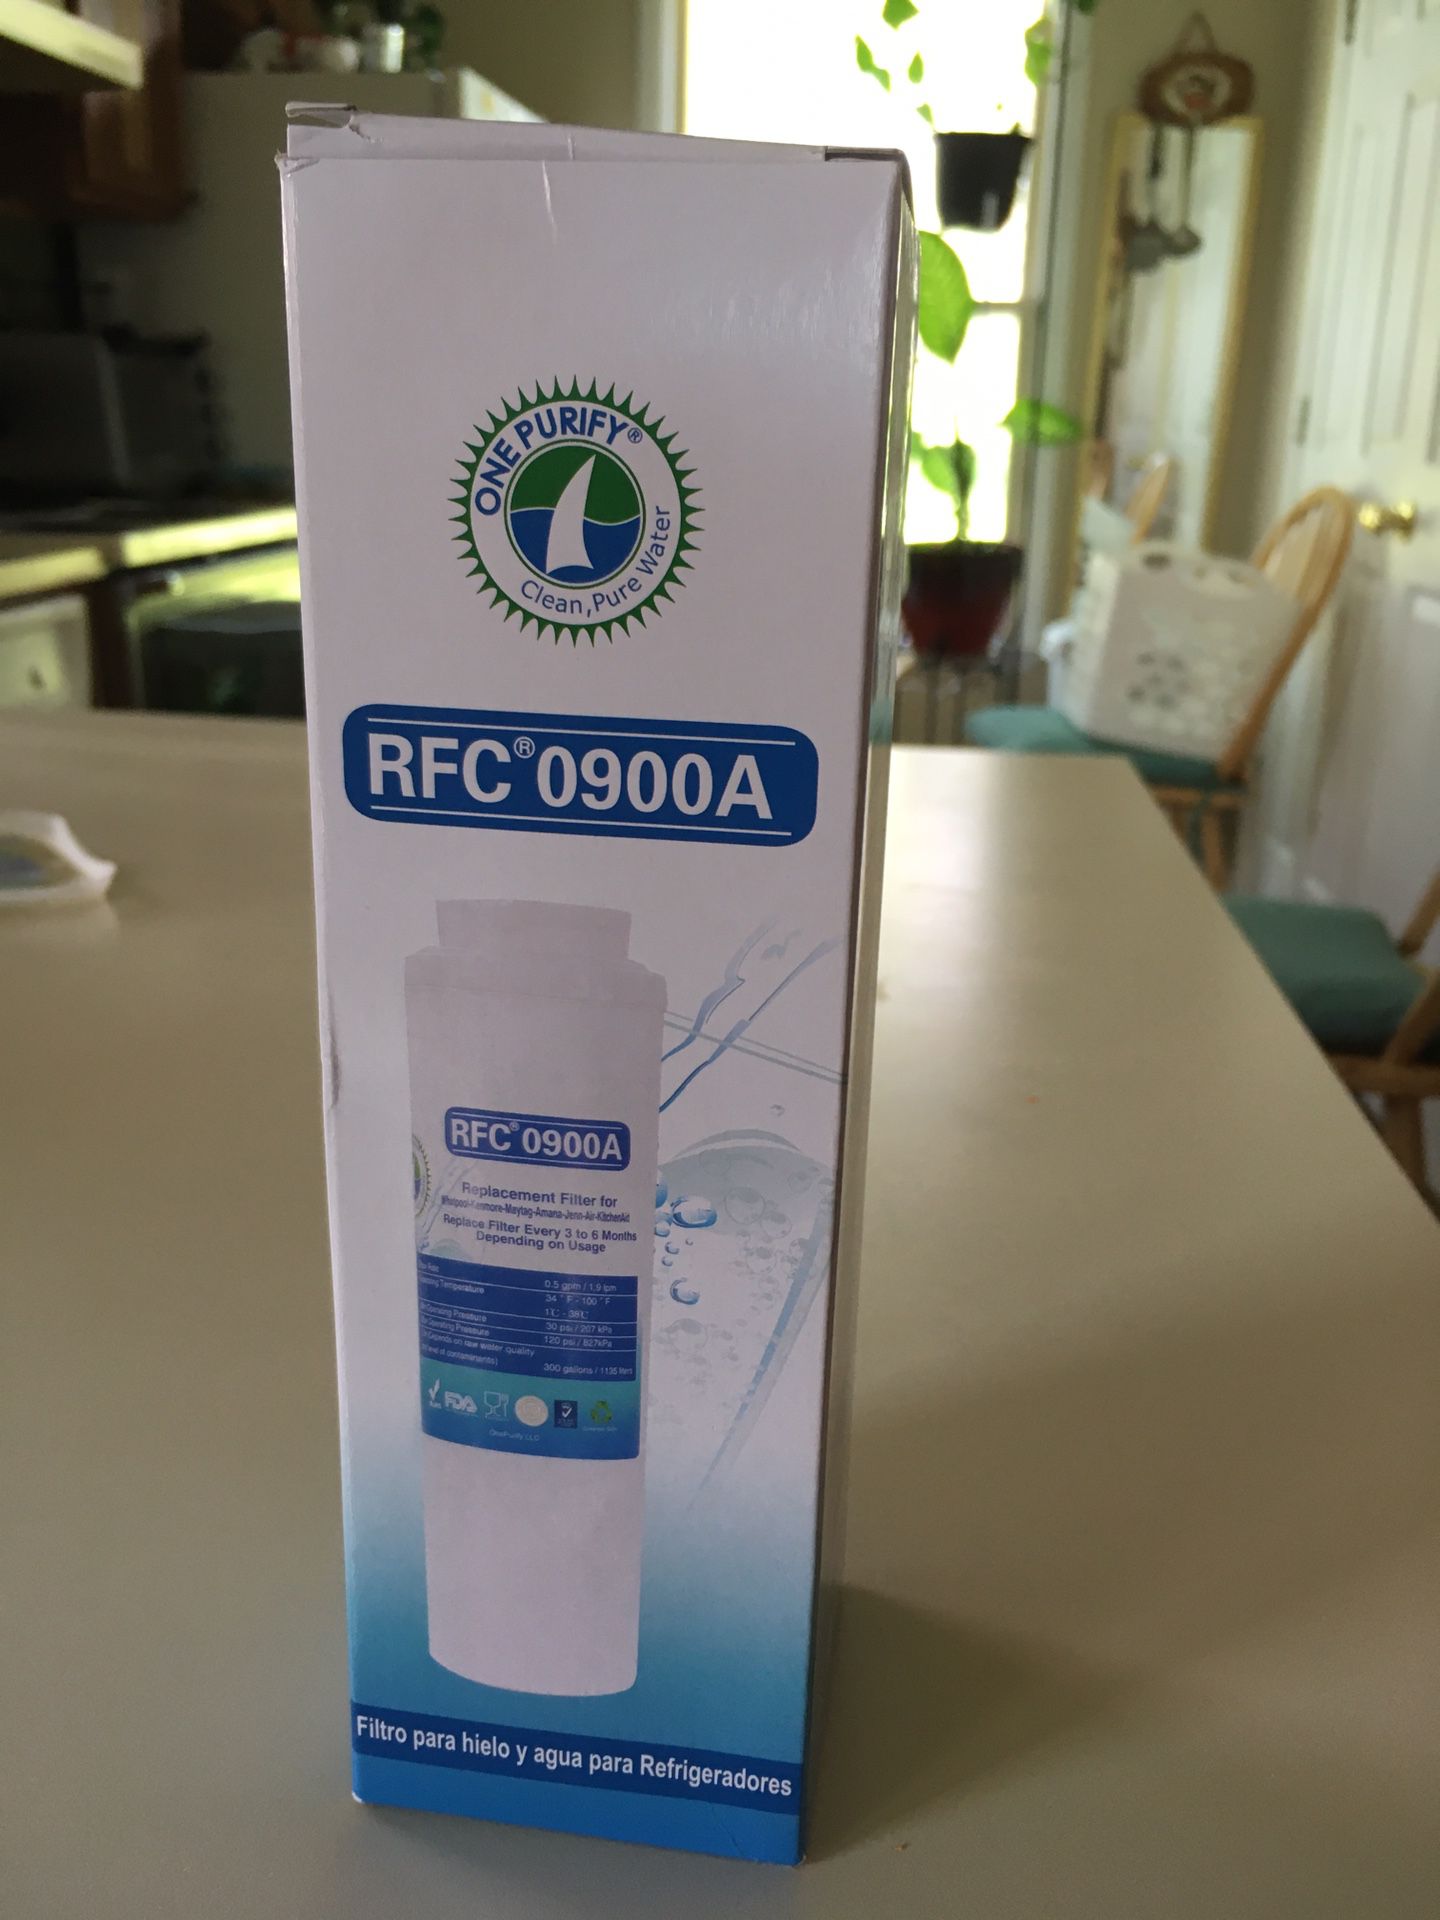 Refrigerator Water Filter RFC 0900A (Fits these brands : Maytag , Kenmore , Whirlpool , Amana)